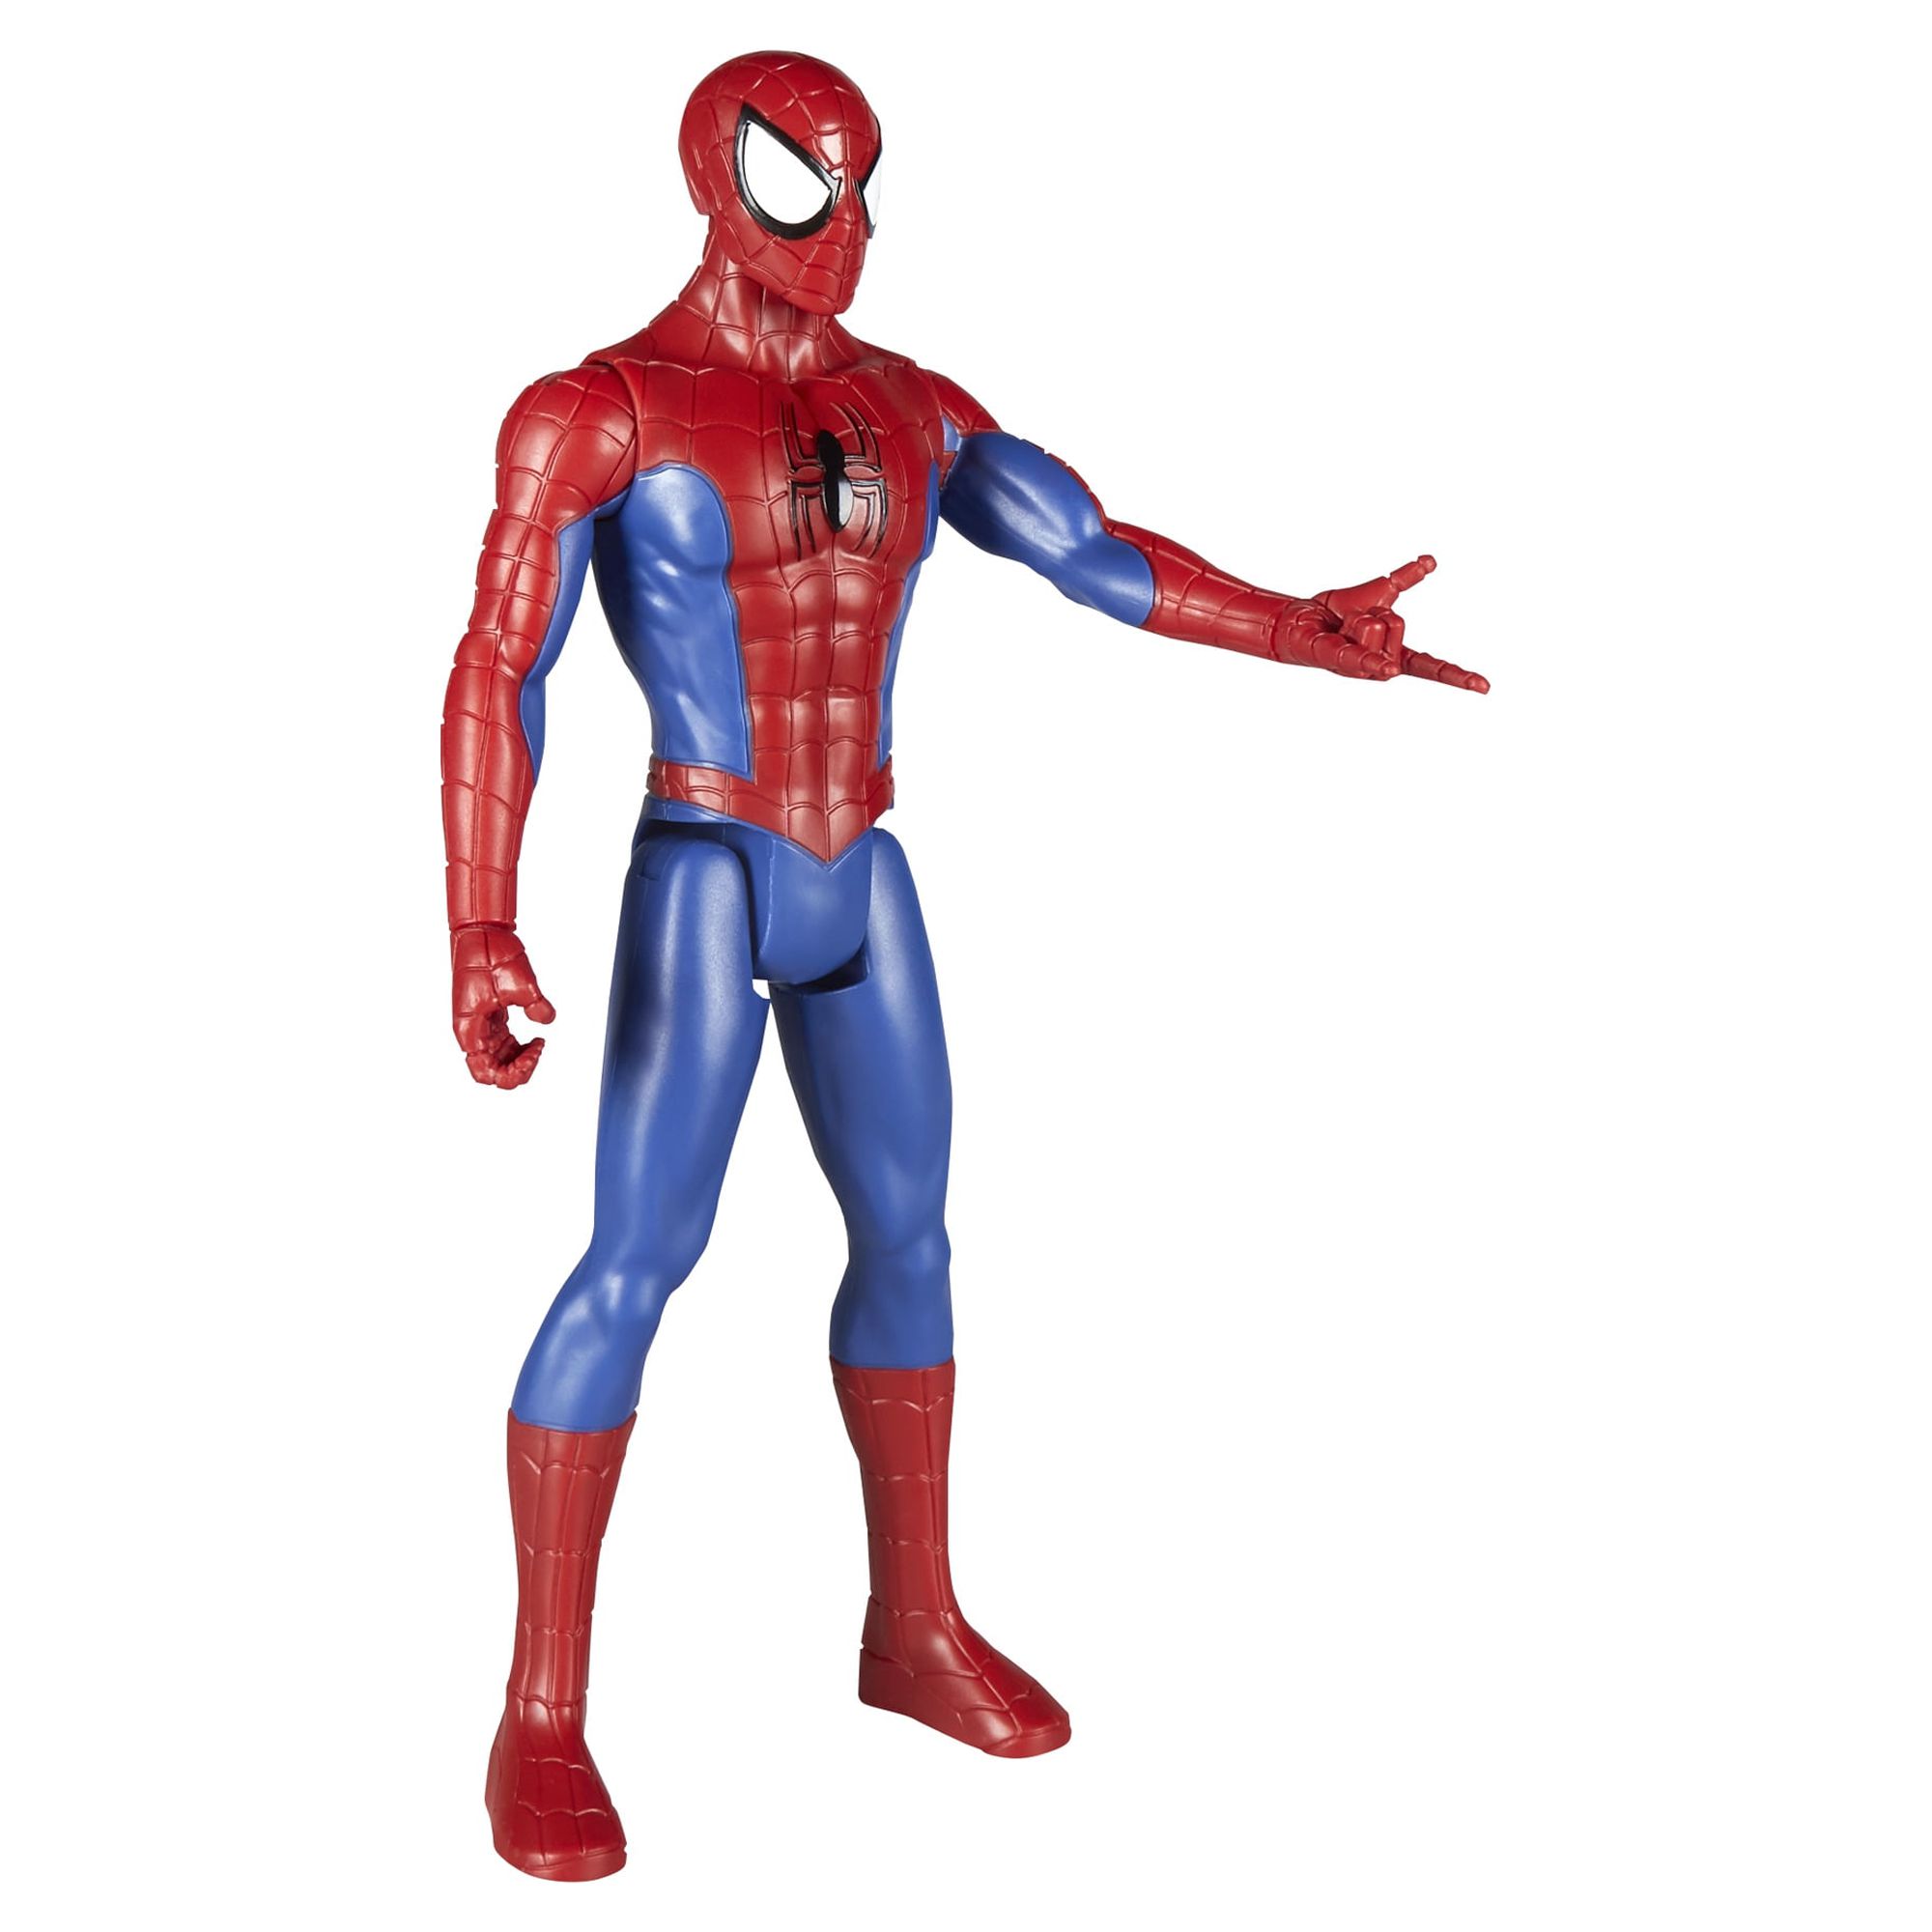 Marvel Spiderman: Titan Hero Series Spiderman Kids Toy Action Figure for Boys and Girls (13”) - image 1 of 16